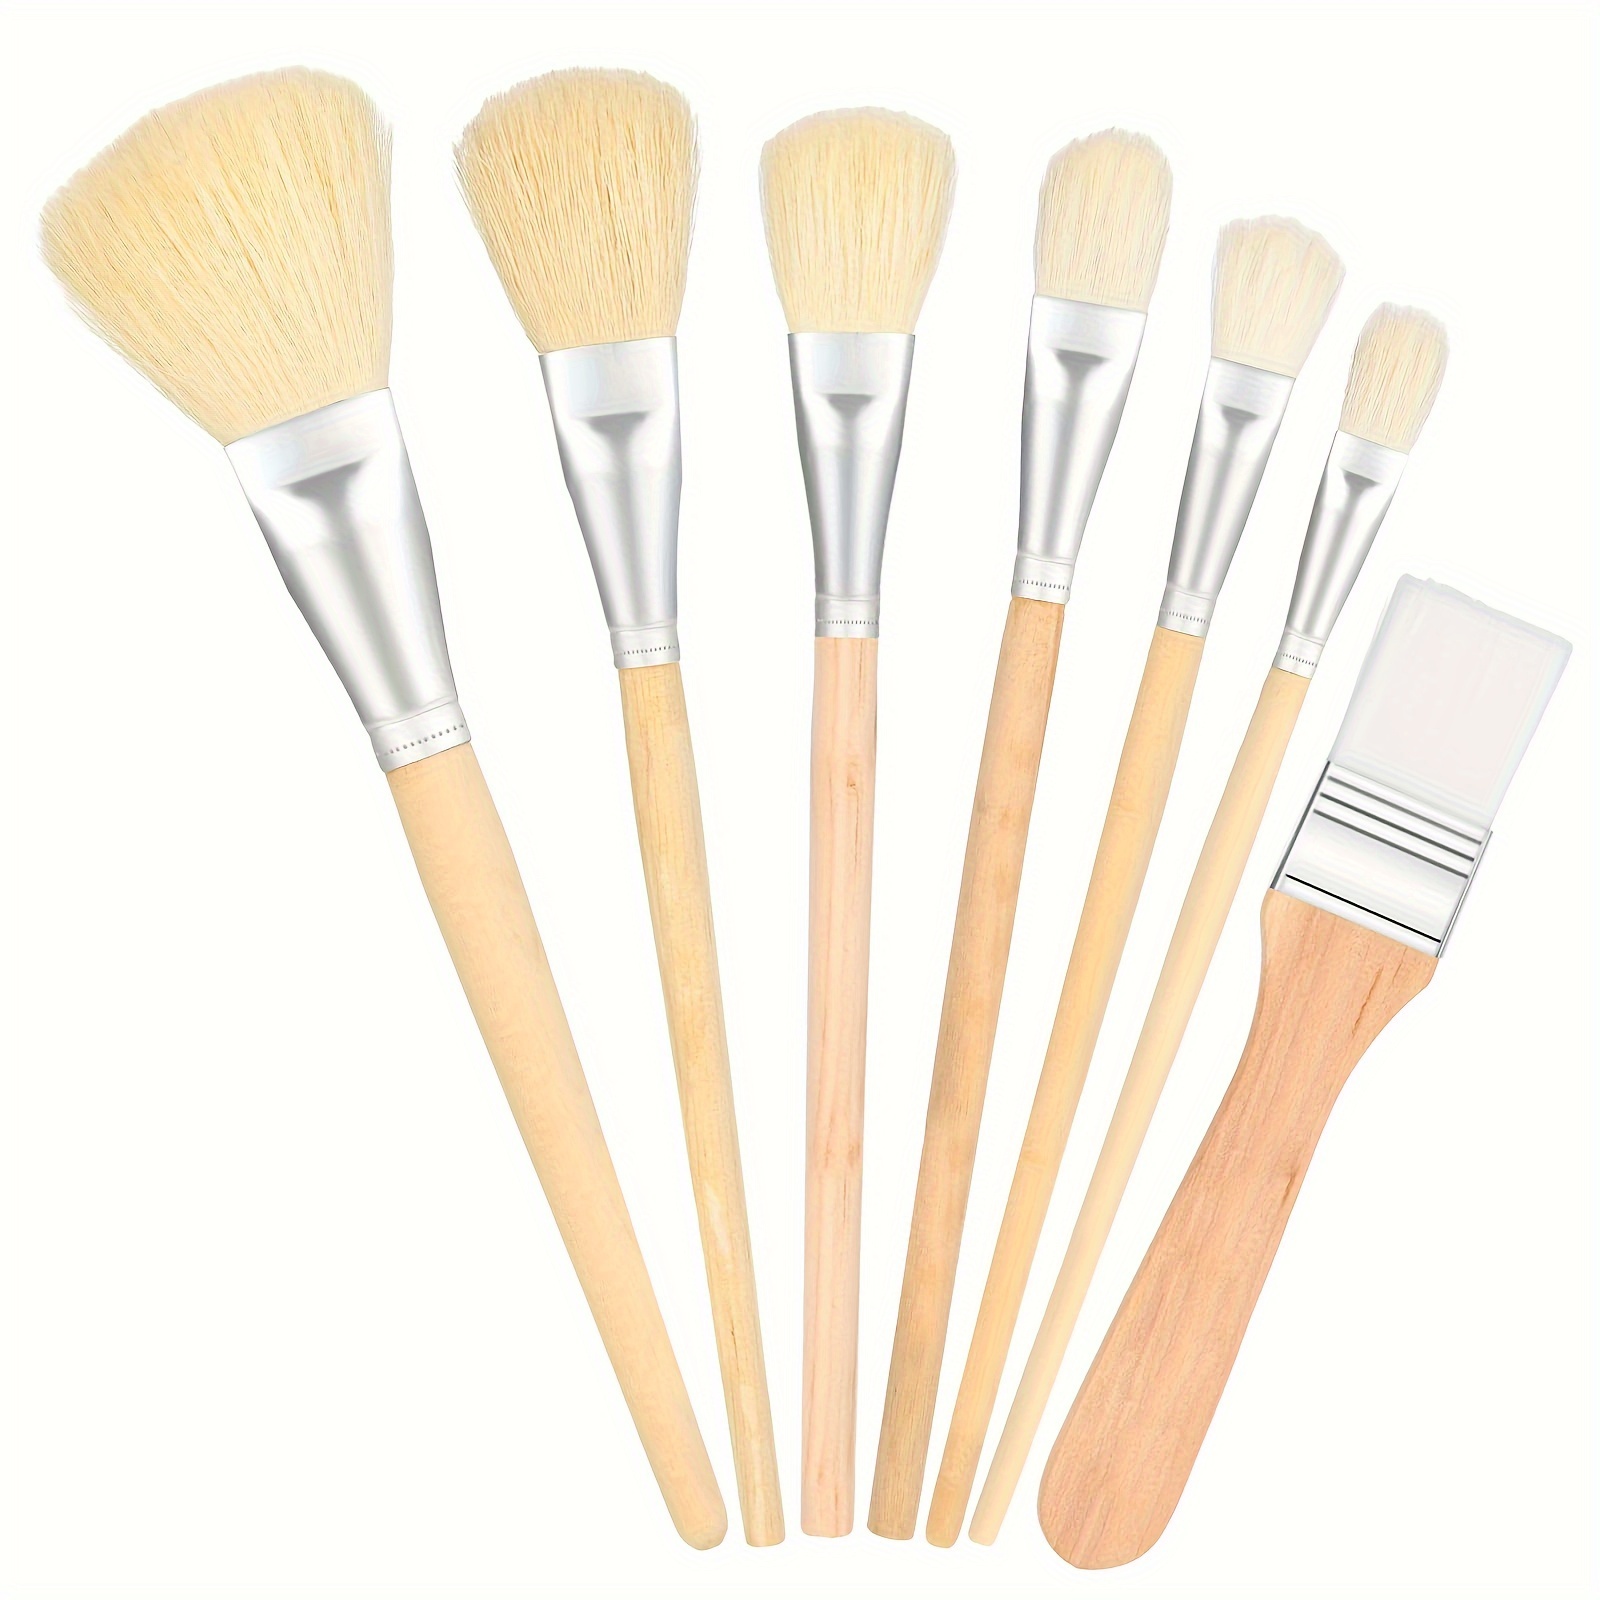 

Mop Brush For Acrylic Painting, 7pcs Versatile Blending Brush Paint Brushes For Acrylic Painting Goat Hair Paint Brush Set For Acrylic Watercolor Oil Painting Face Body Art